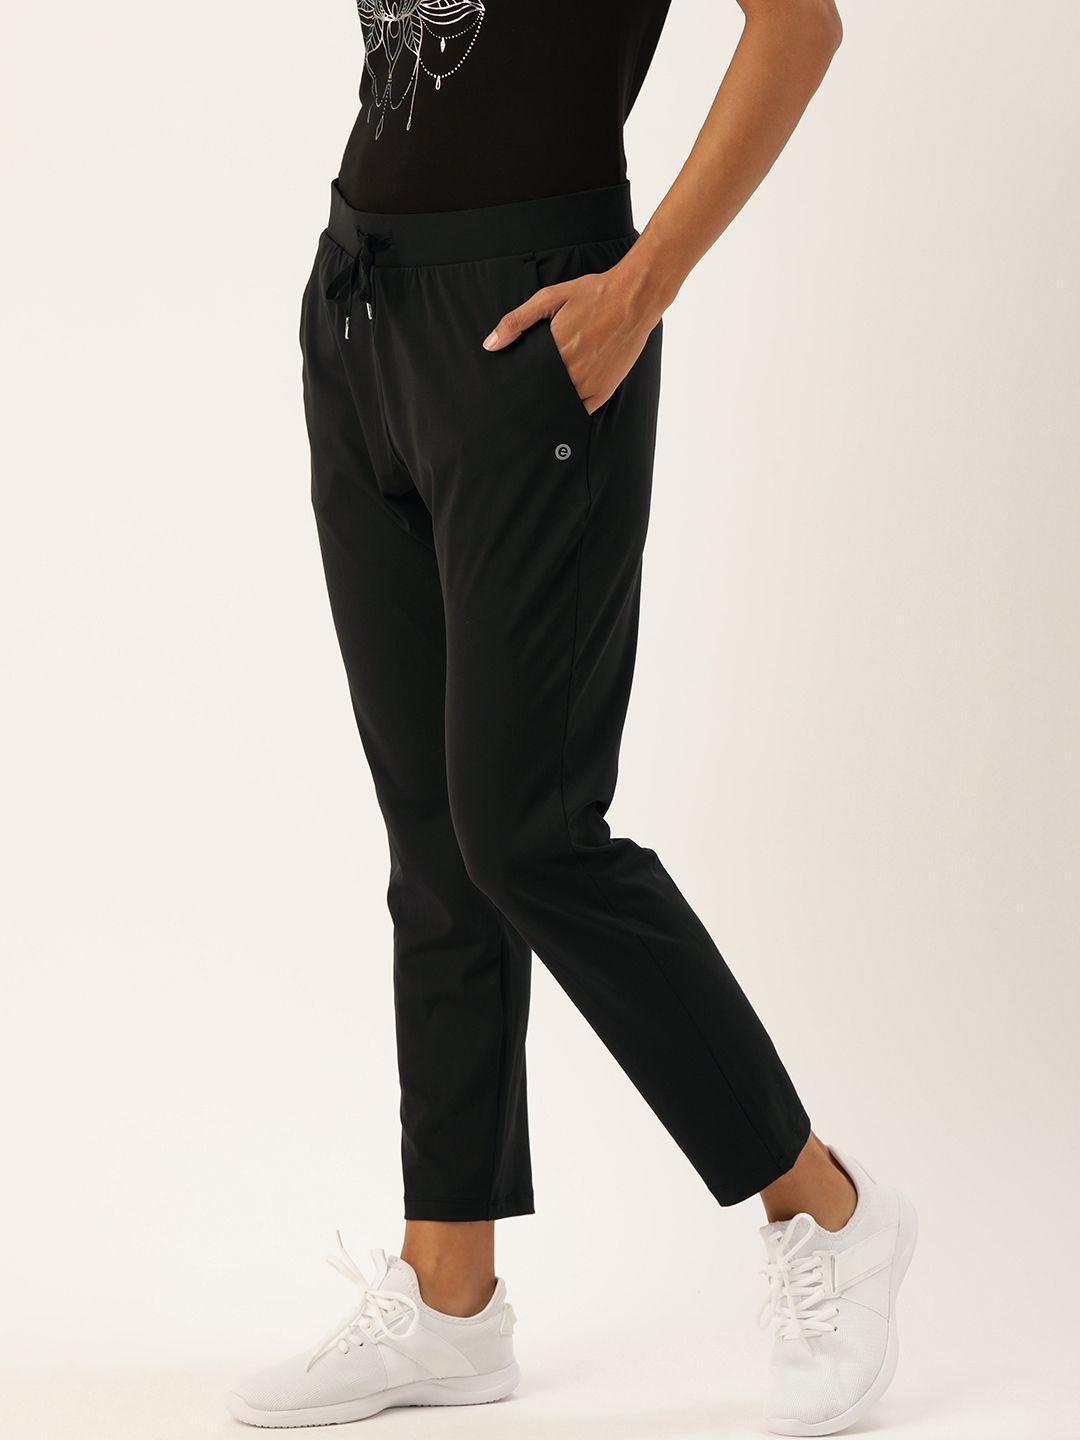 enamor women jet black relaxed fit rapid dry & antimicrobial travel smart active pants